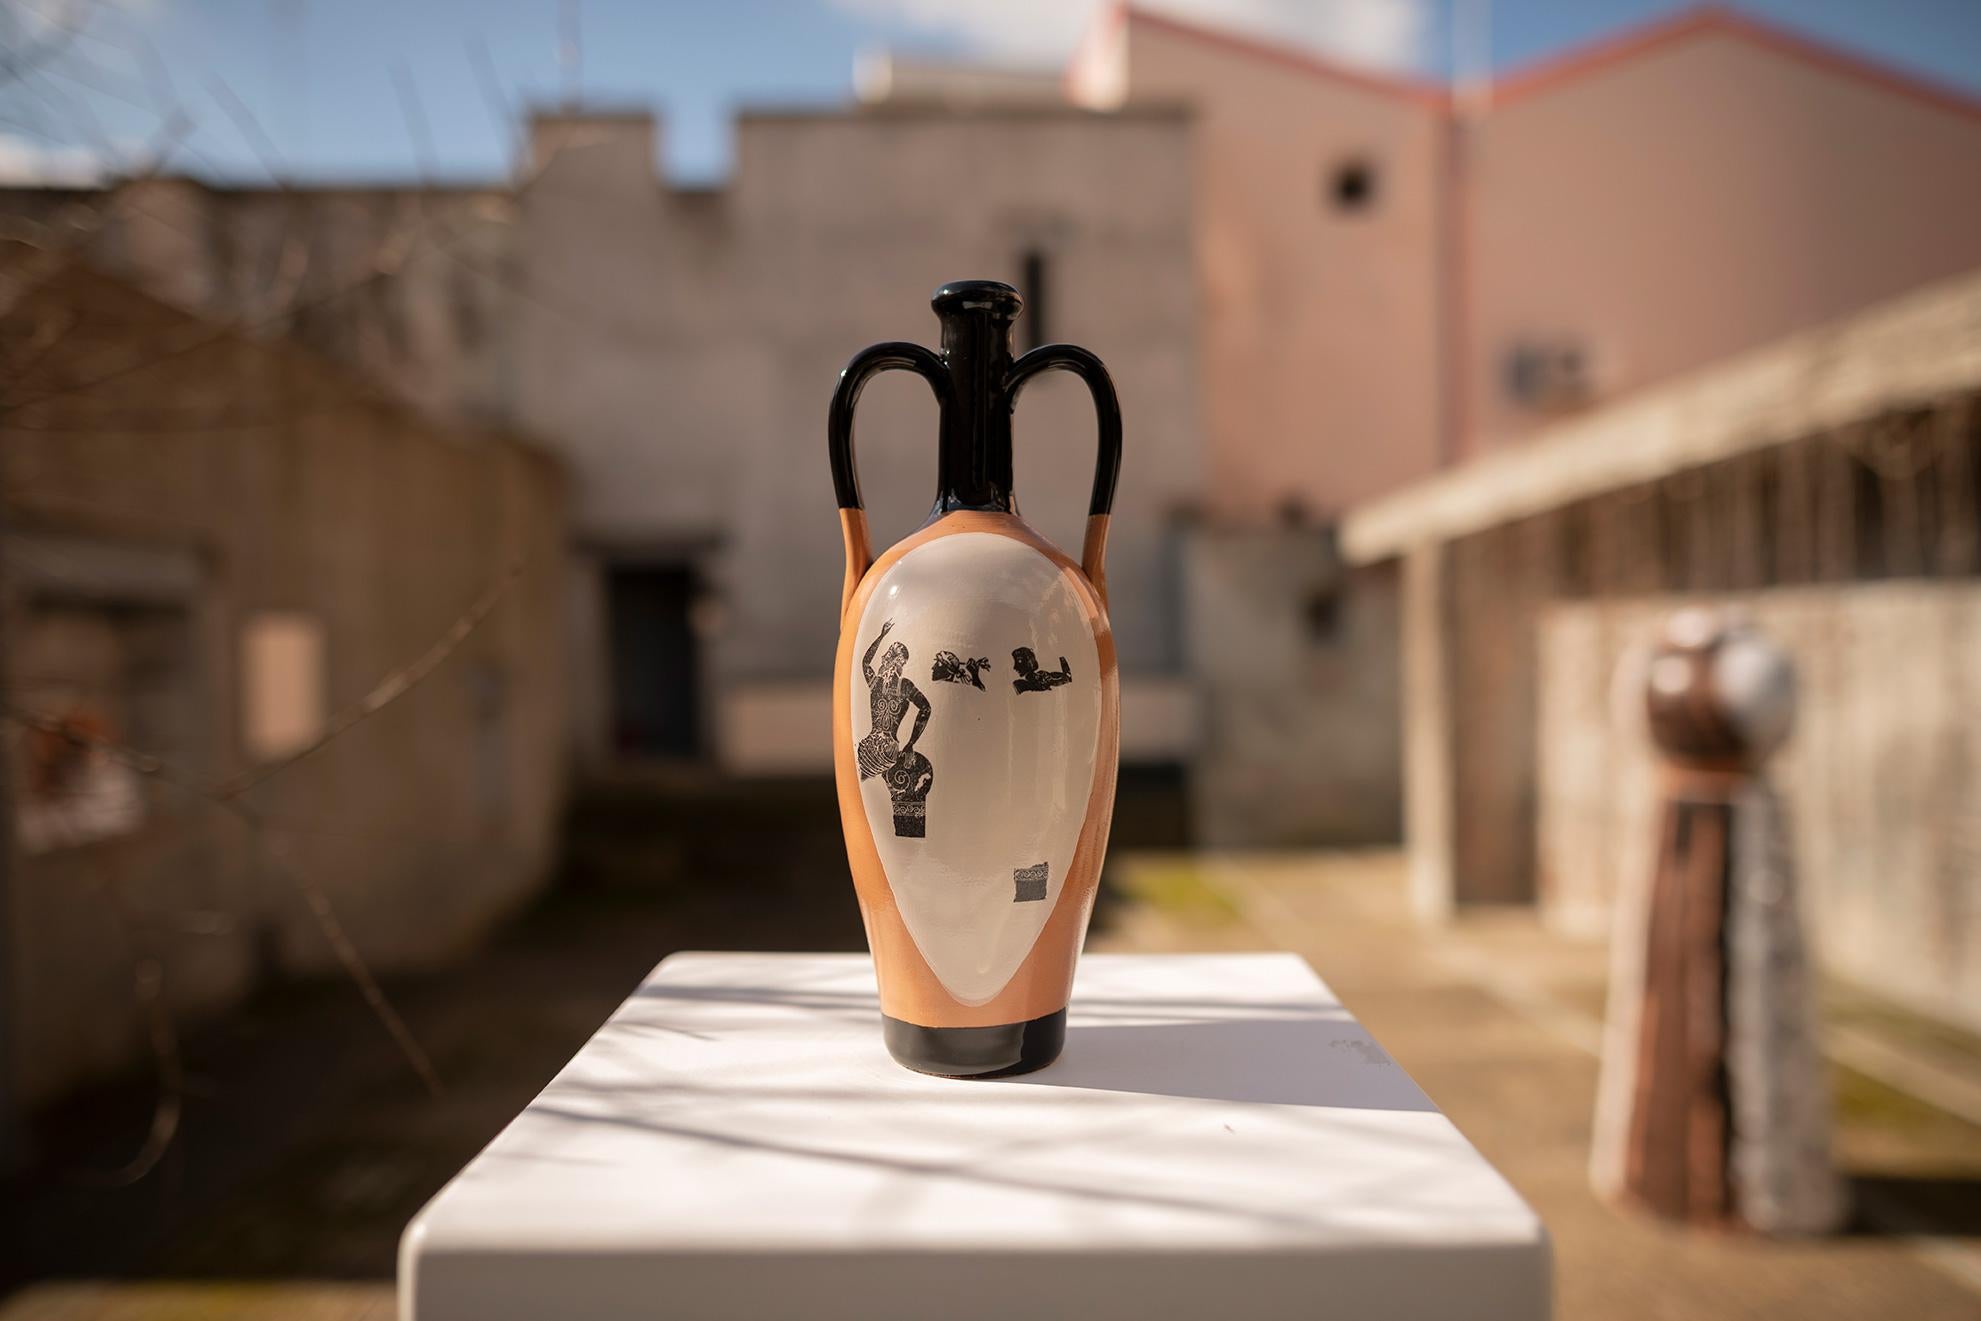 The 'Magna Grecia' collection of amphorae is a creation of unique pieces; small terracotta vases with two handles produced and decorated by hand with graphic variants which are decorated using the Decal technique. What distinguishes this collection